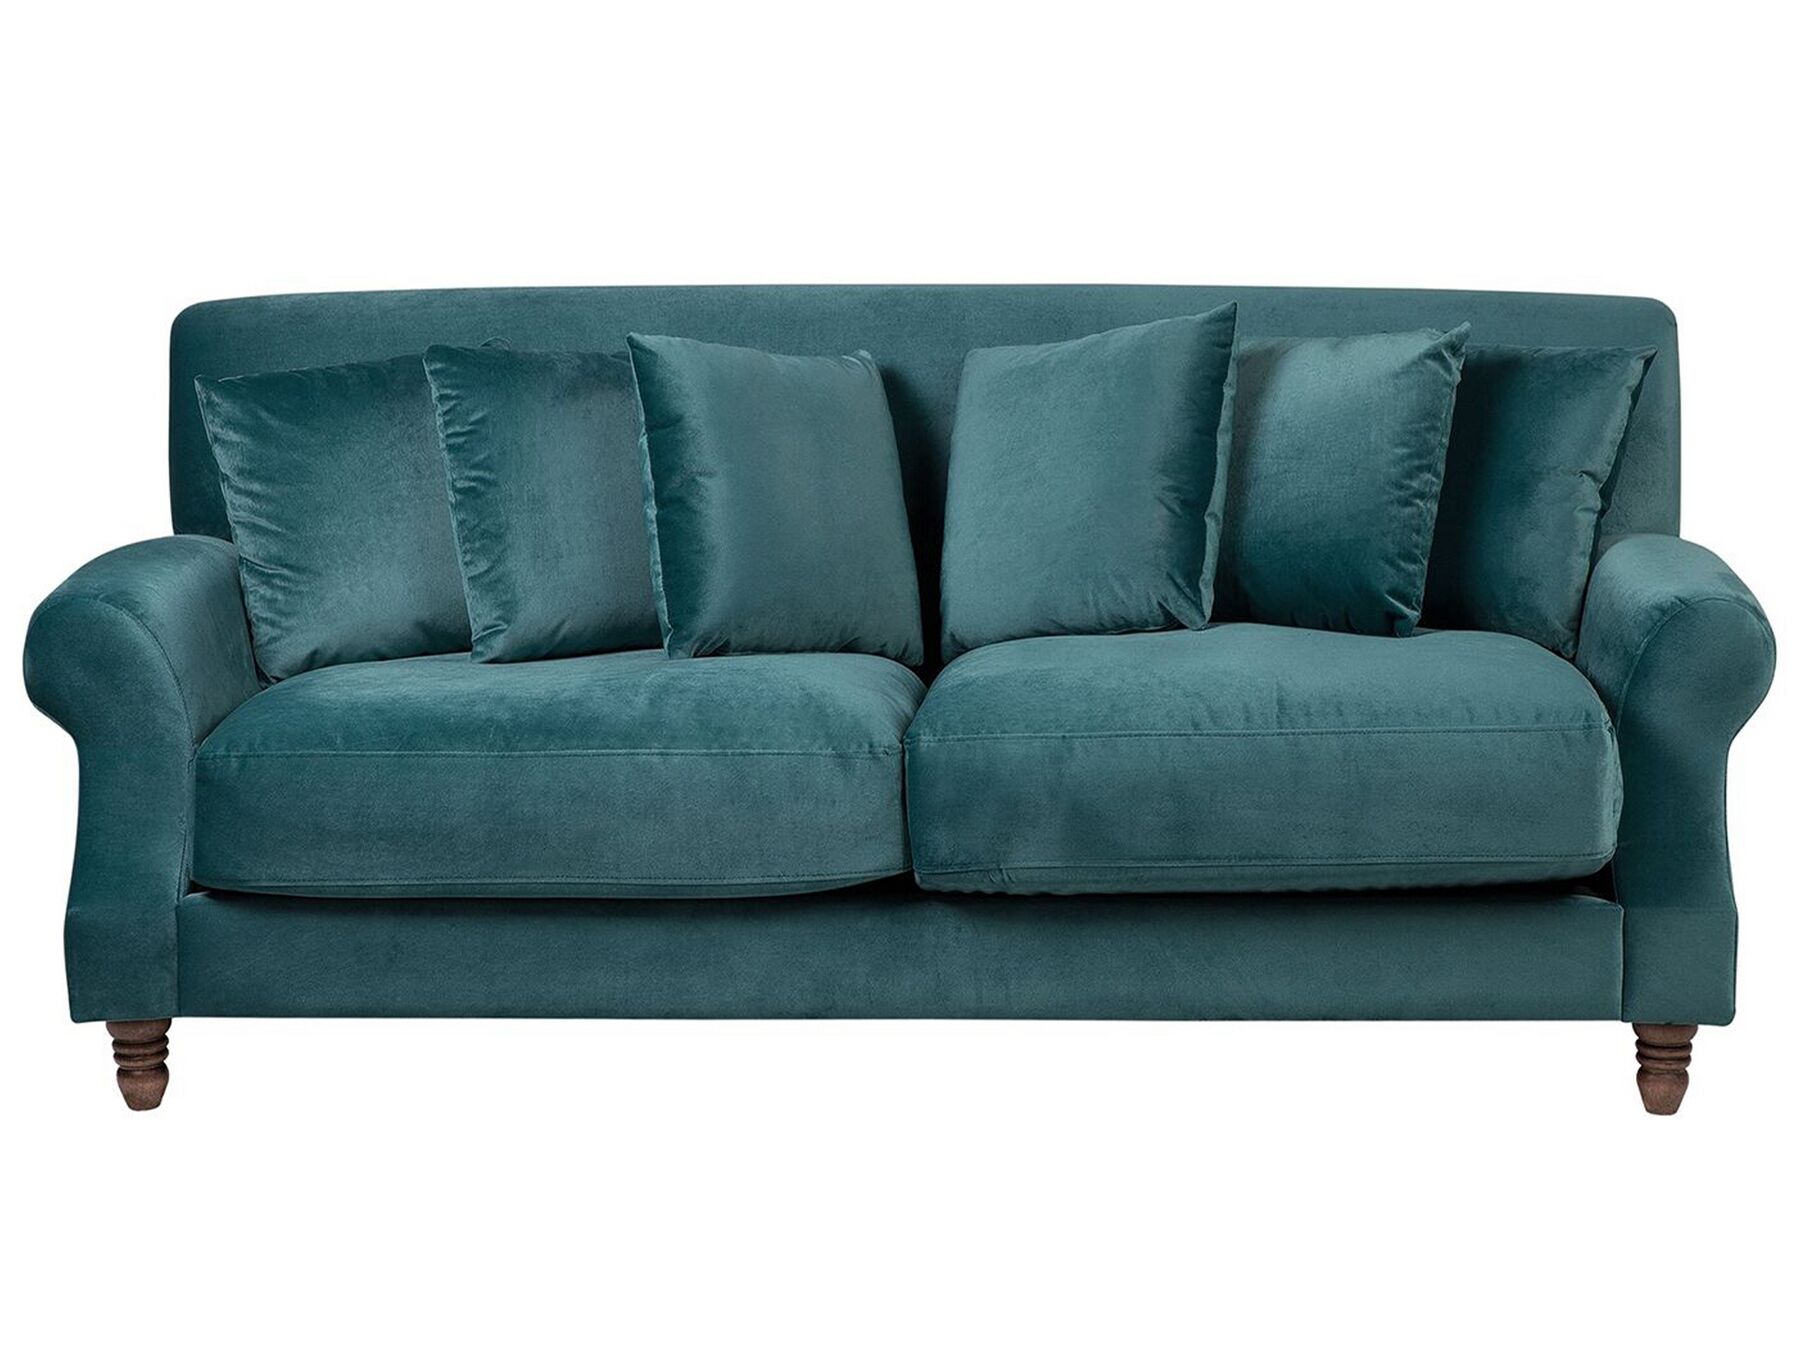 teal sofa bed chair